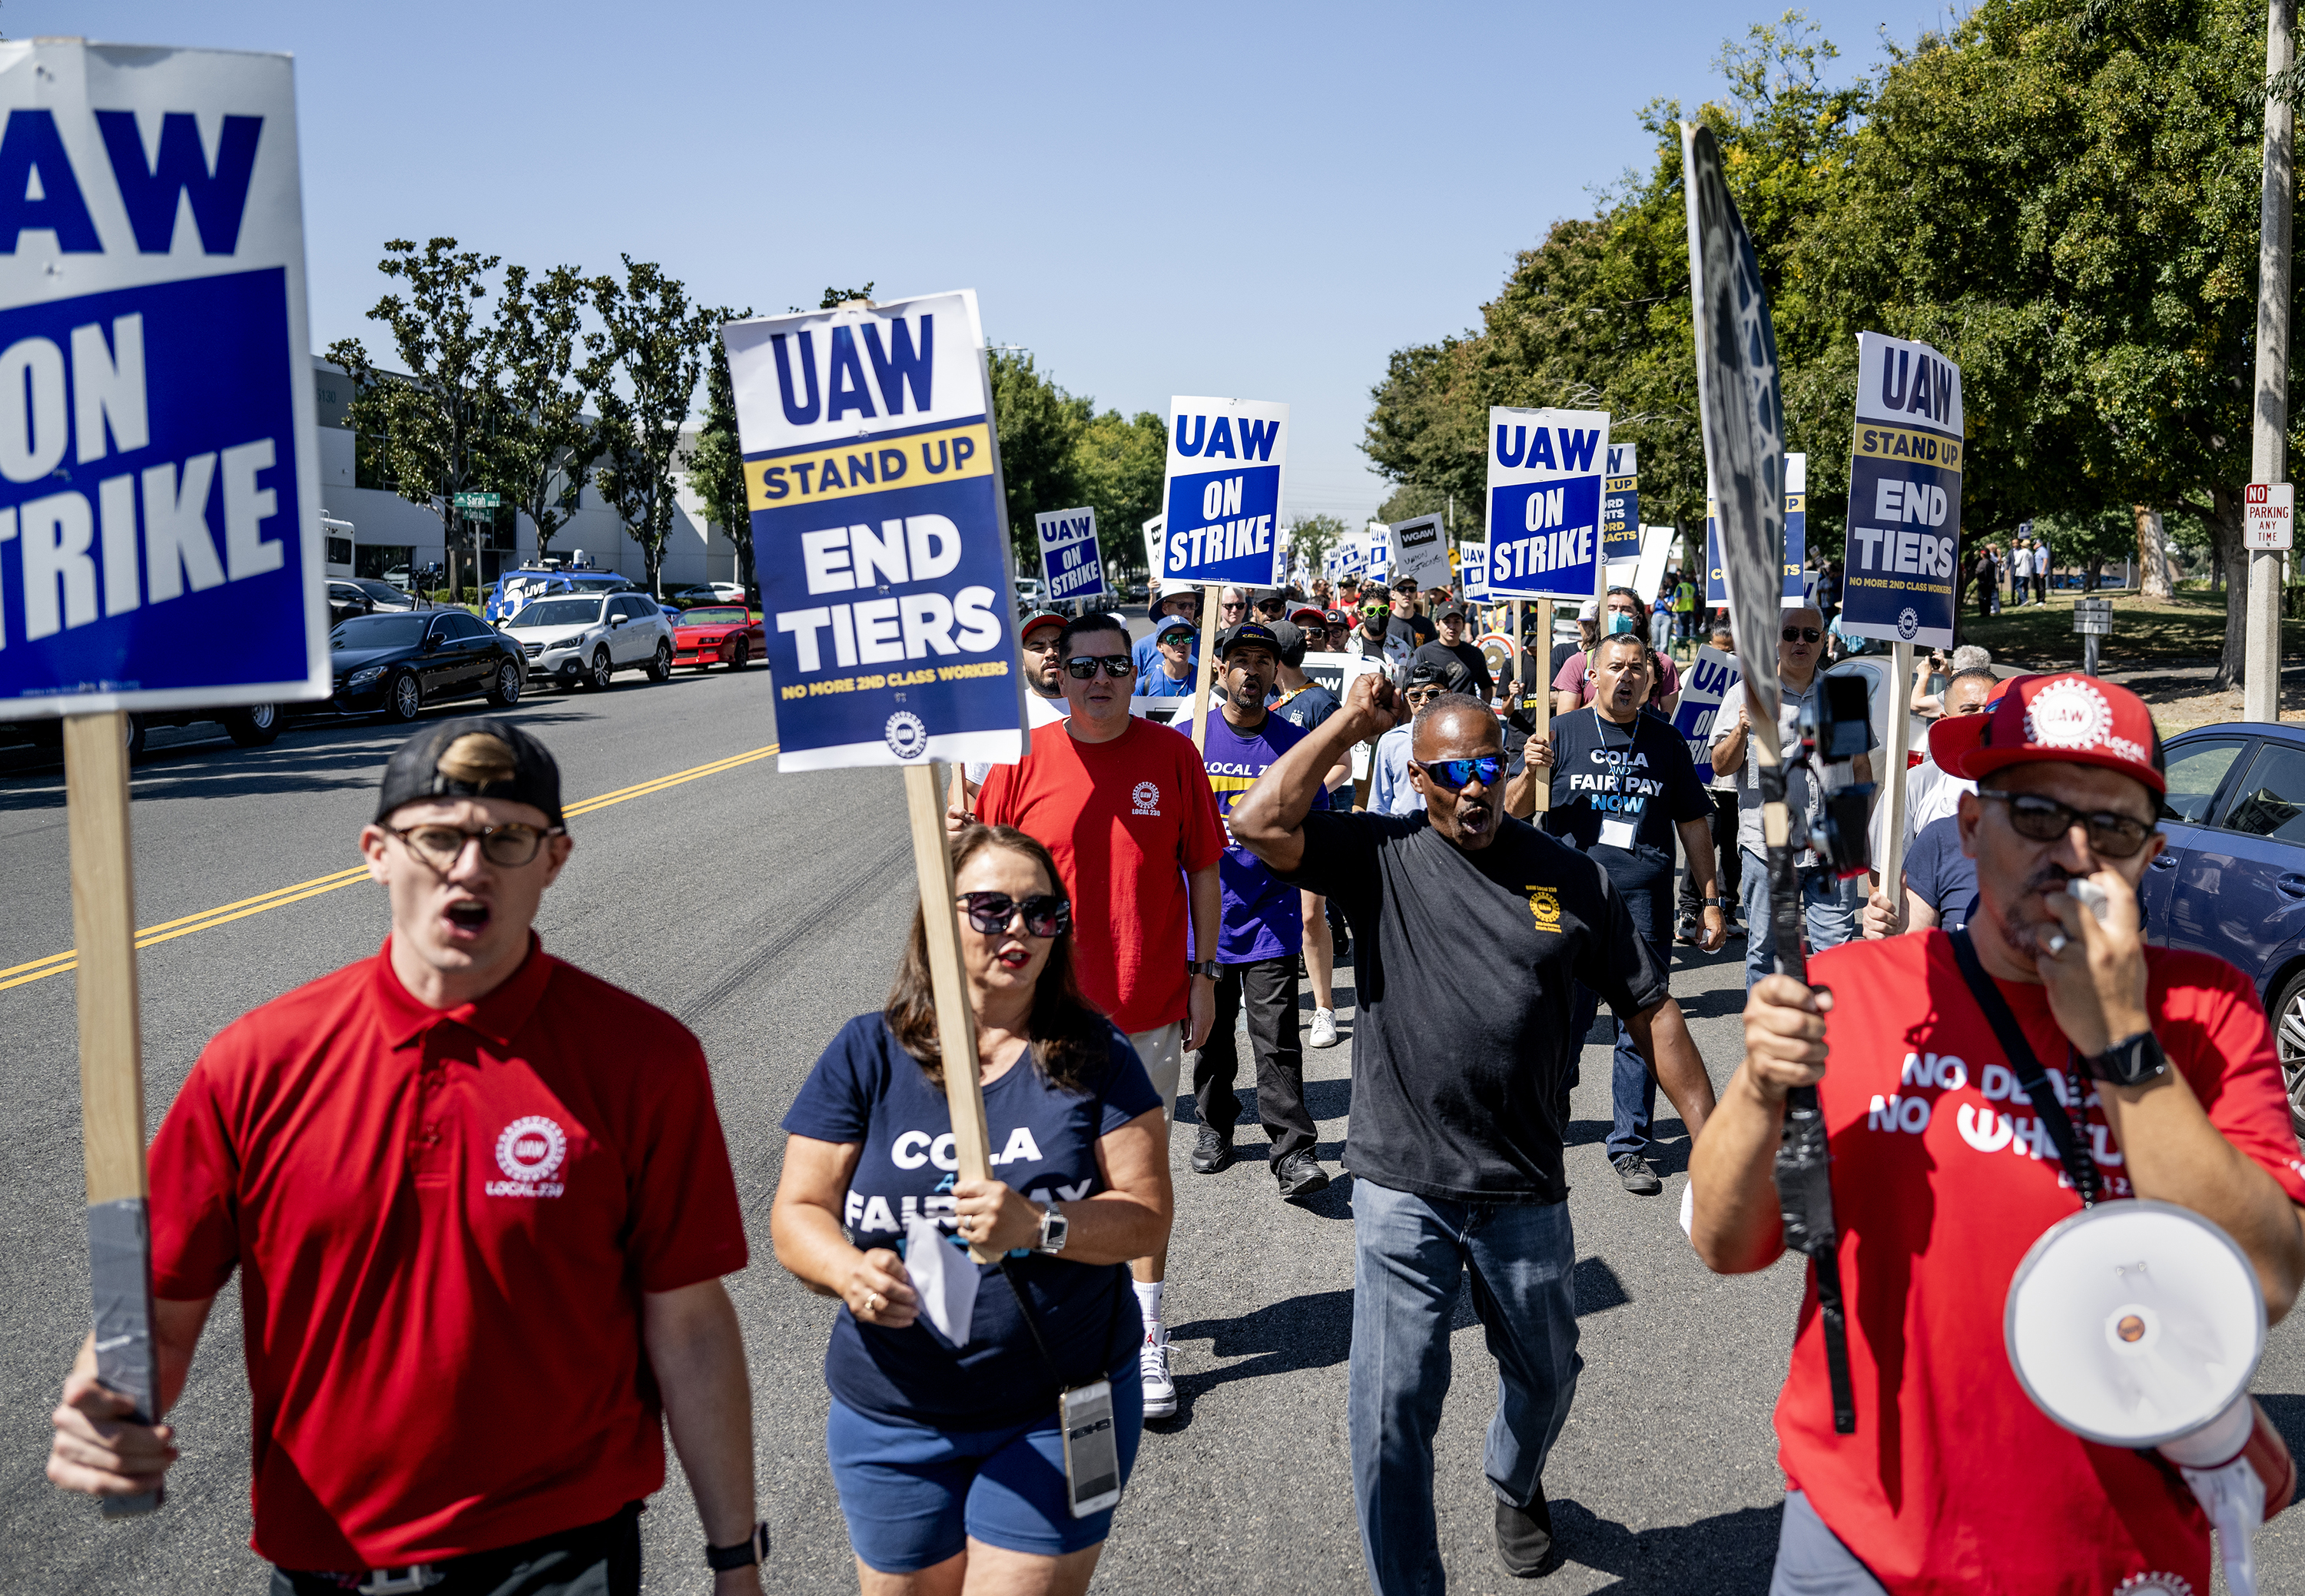 Striking United Auto Workers (UAW) march in front of the Stellantis Mopar facility on September 26, in Ontario, California.